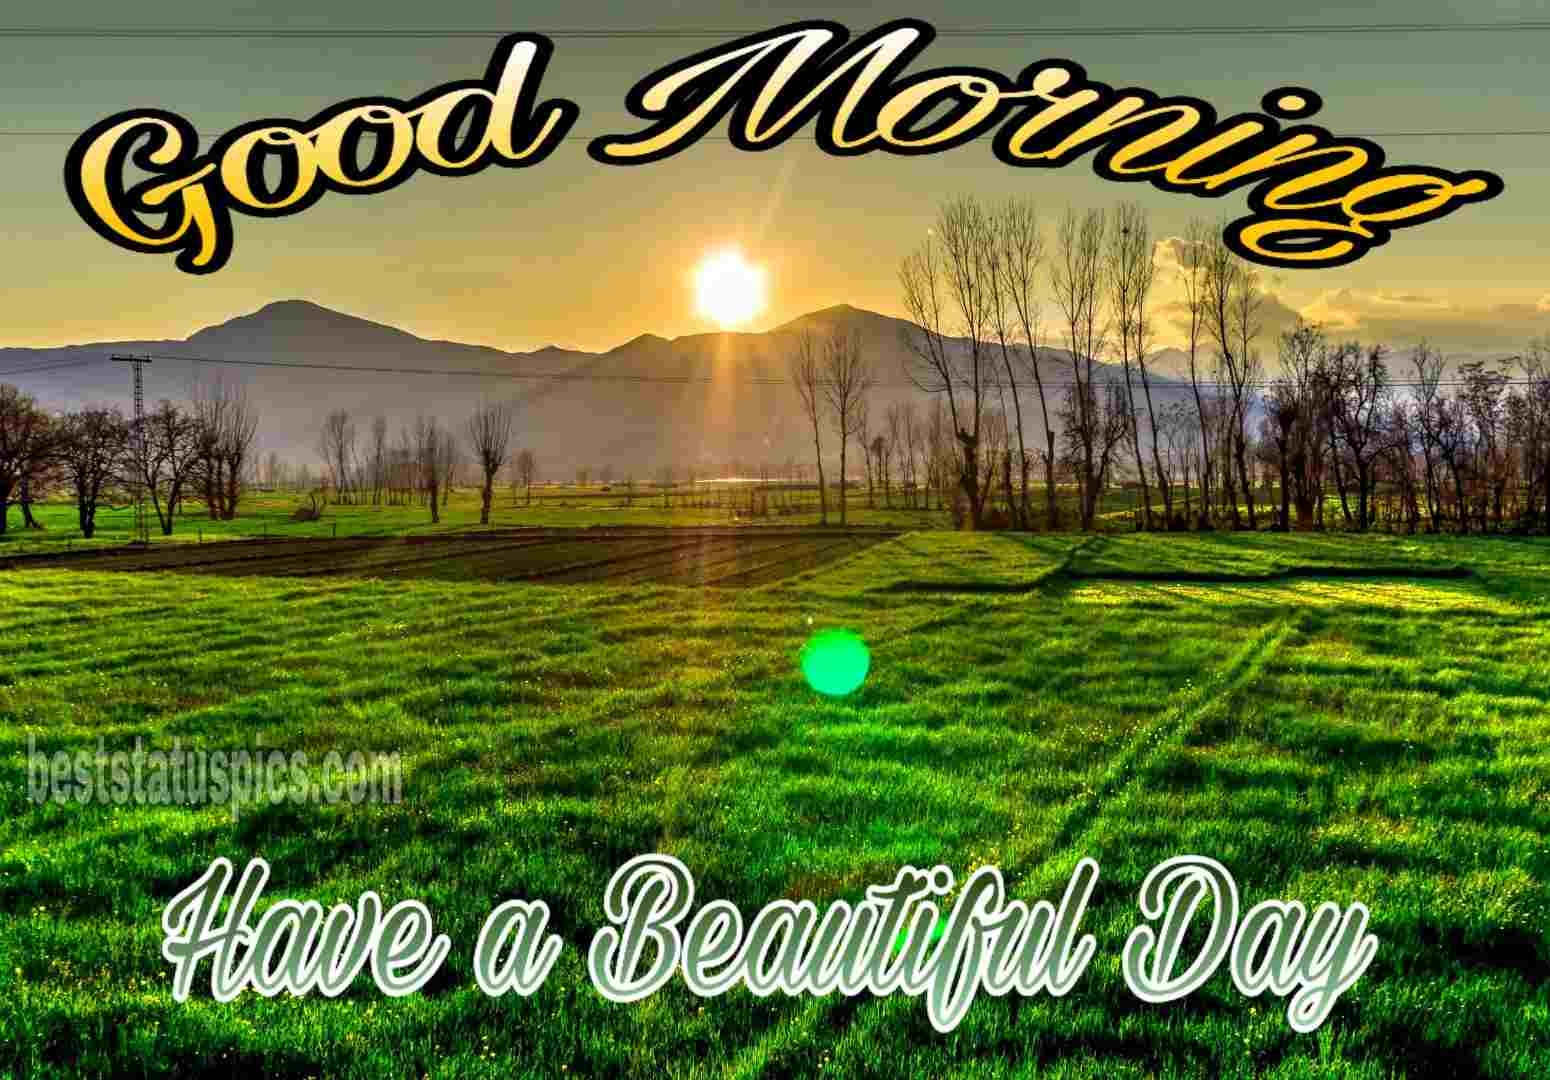 Good Morning Forest Pictures For WhatsApp